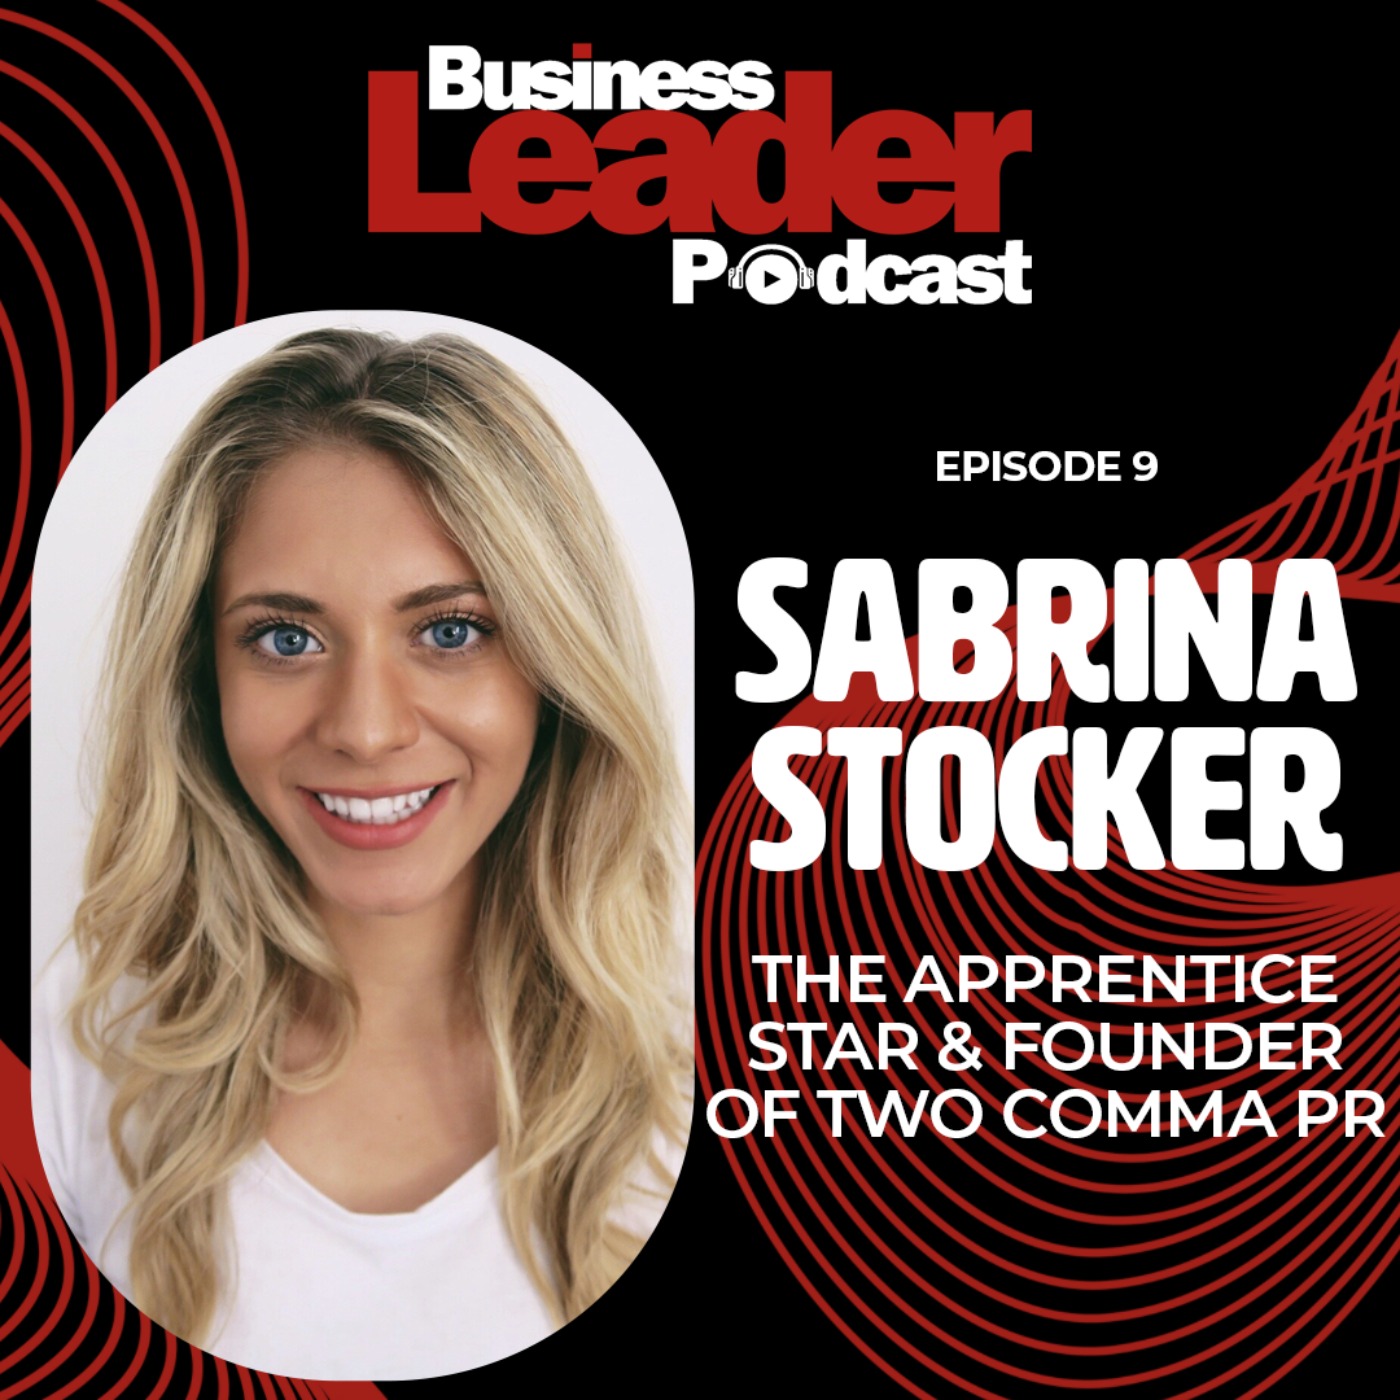 Sabrina Stocker: The Apprentice star and founder of Two Comma PR